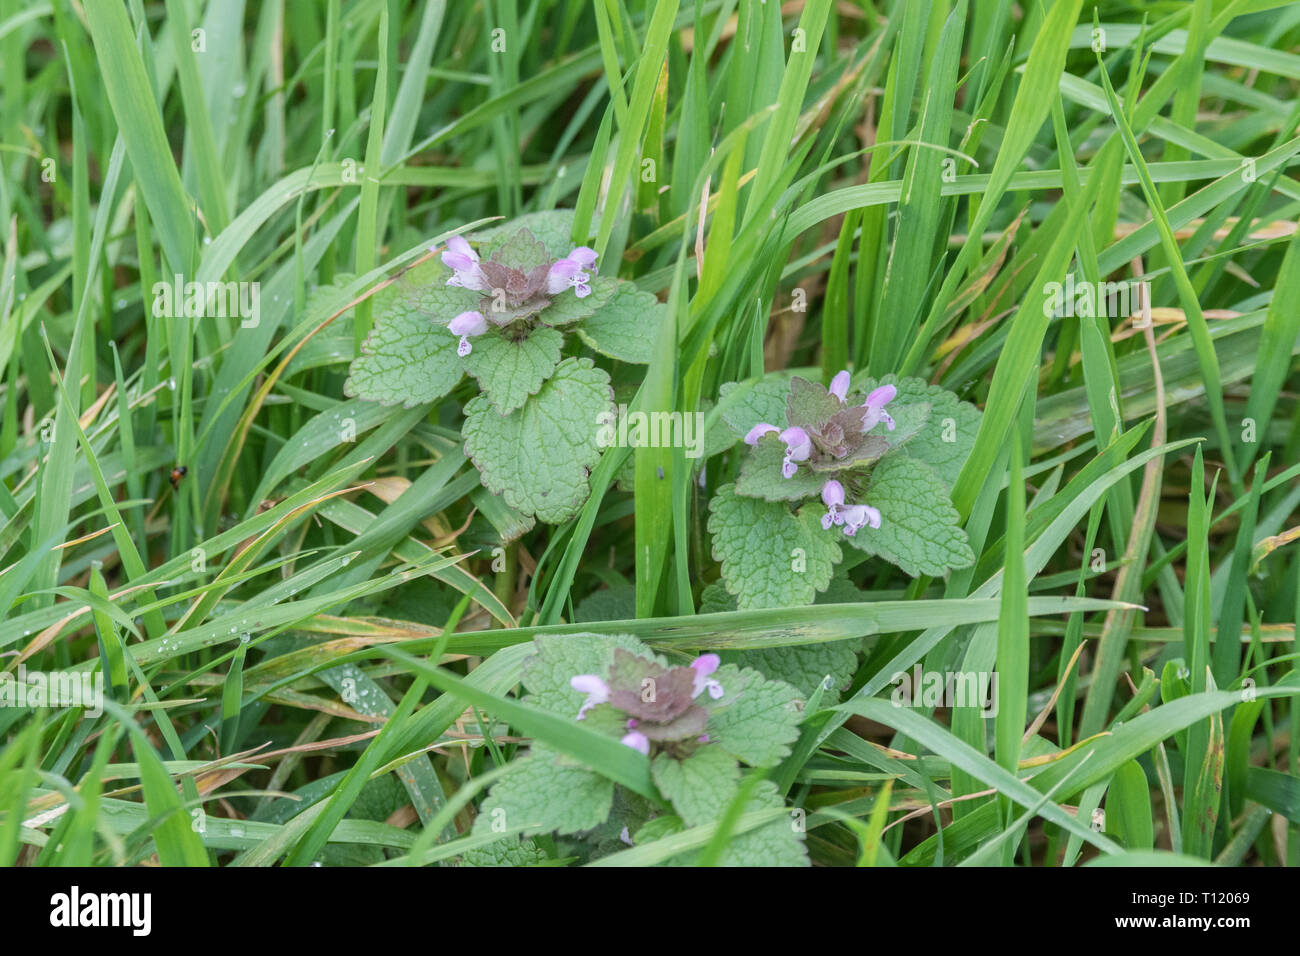 Flowers and foliage of Red Dead-Nettle / Lamium purpureum. Was once used in herbal remedies, and leaves may also be eaten when cooked. Stock Photo